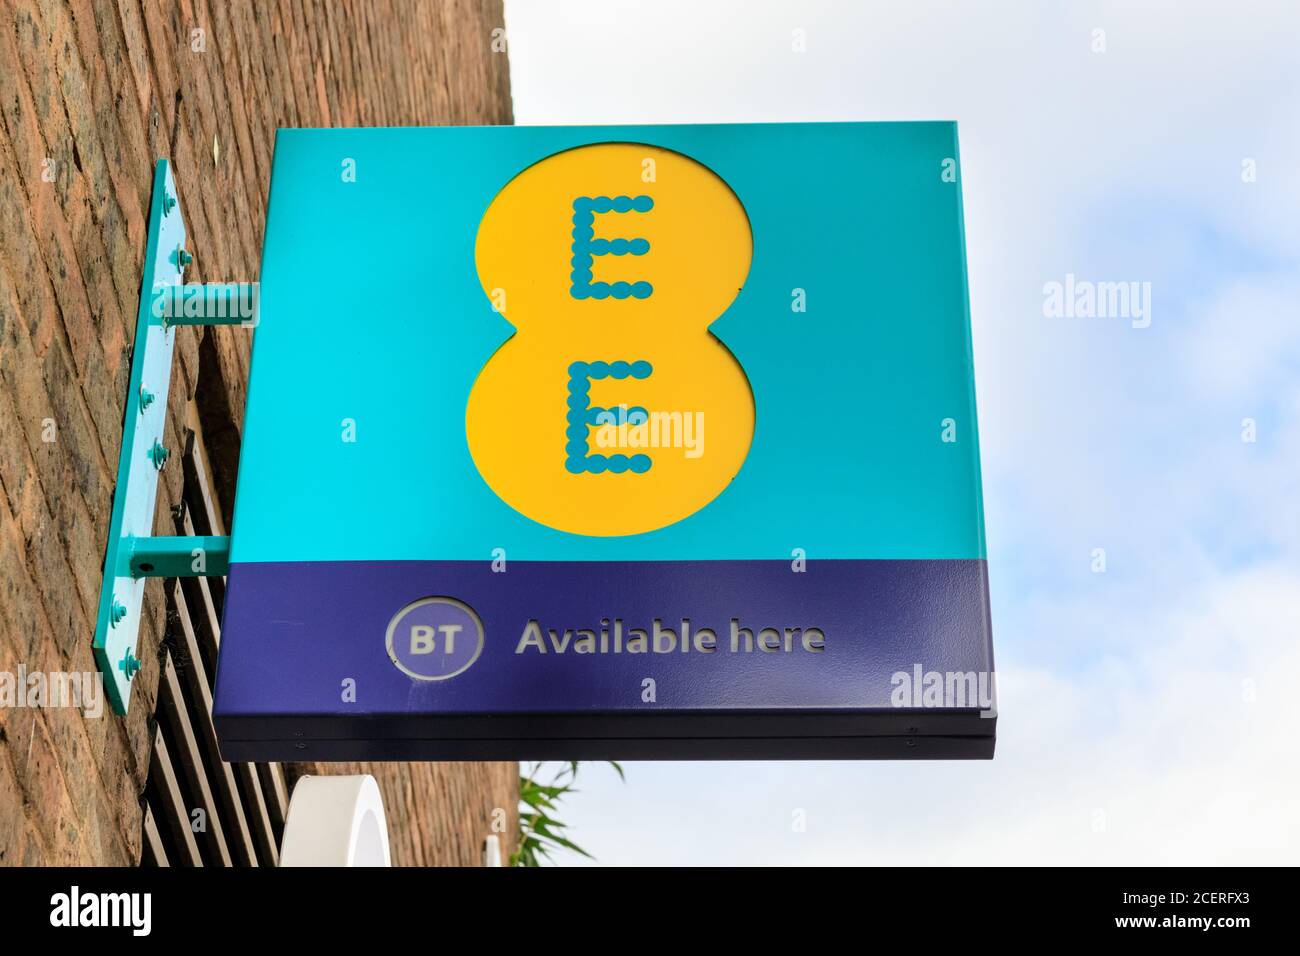 EE telecoms and mobile phone corporate logo and sign outside shop in London, England, UK Stock Photo